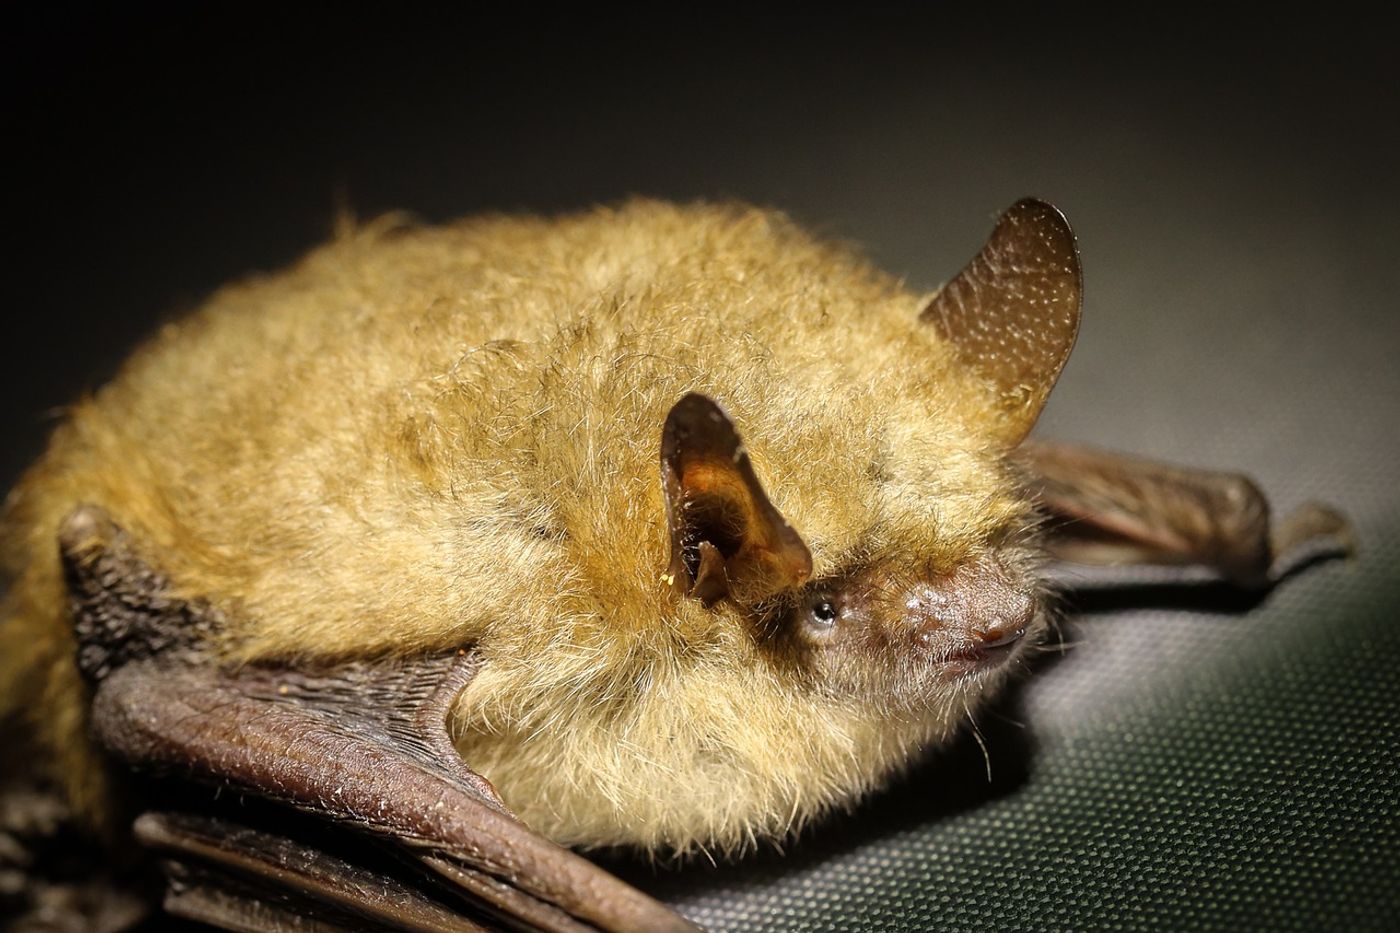 American bats of all kinds are in trouble as scientists scramble to solve a fungus problem.